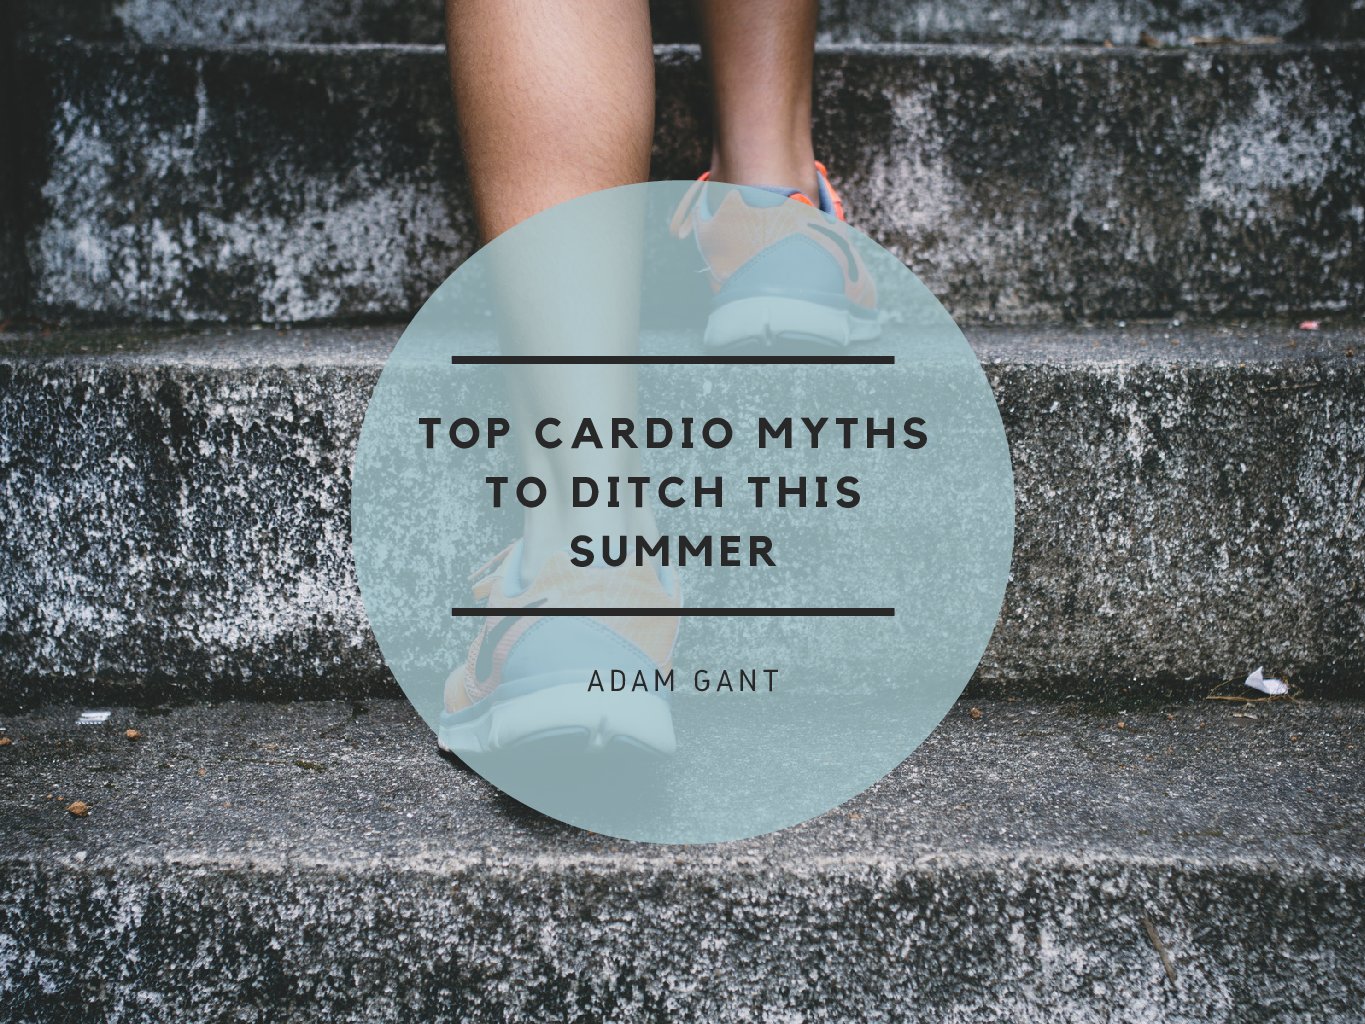 Top Cardio Myths to Ditch this Summer